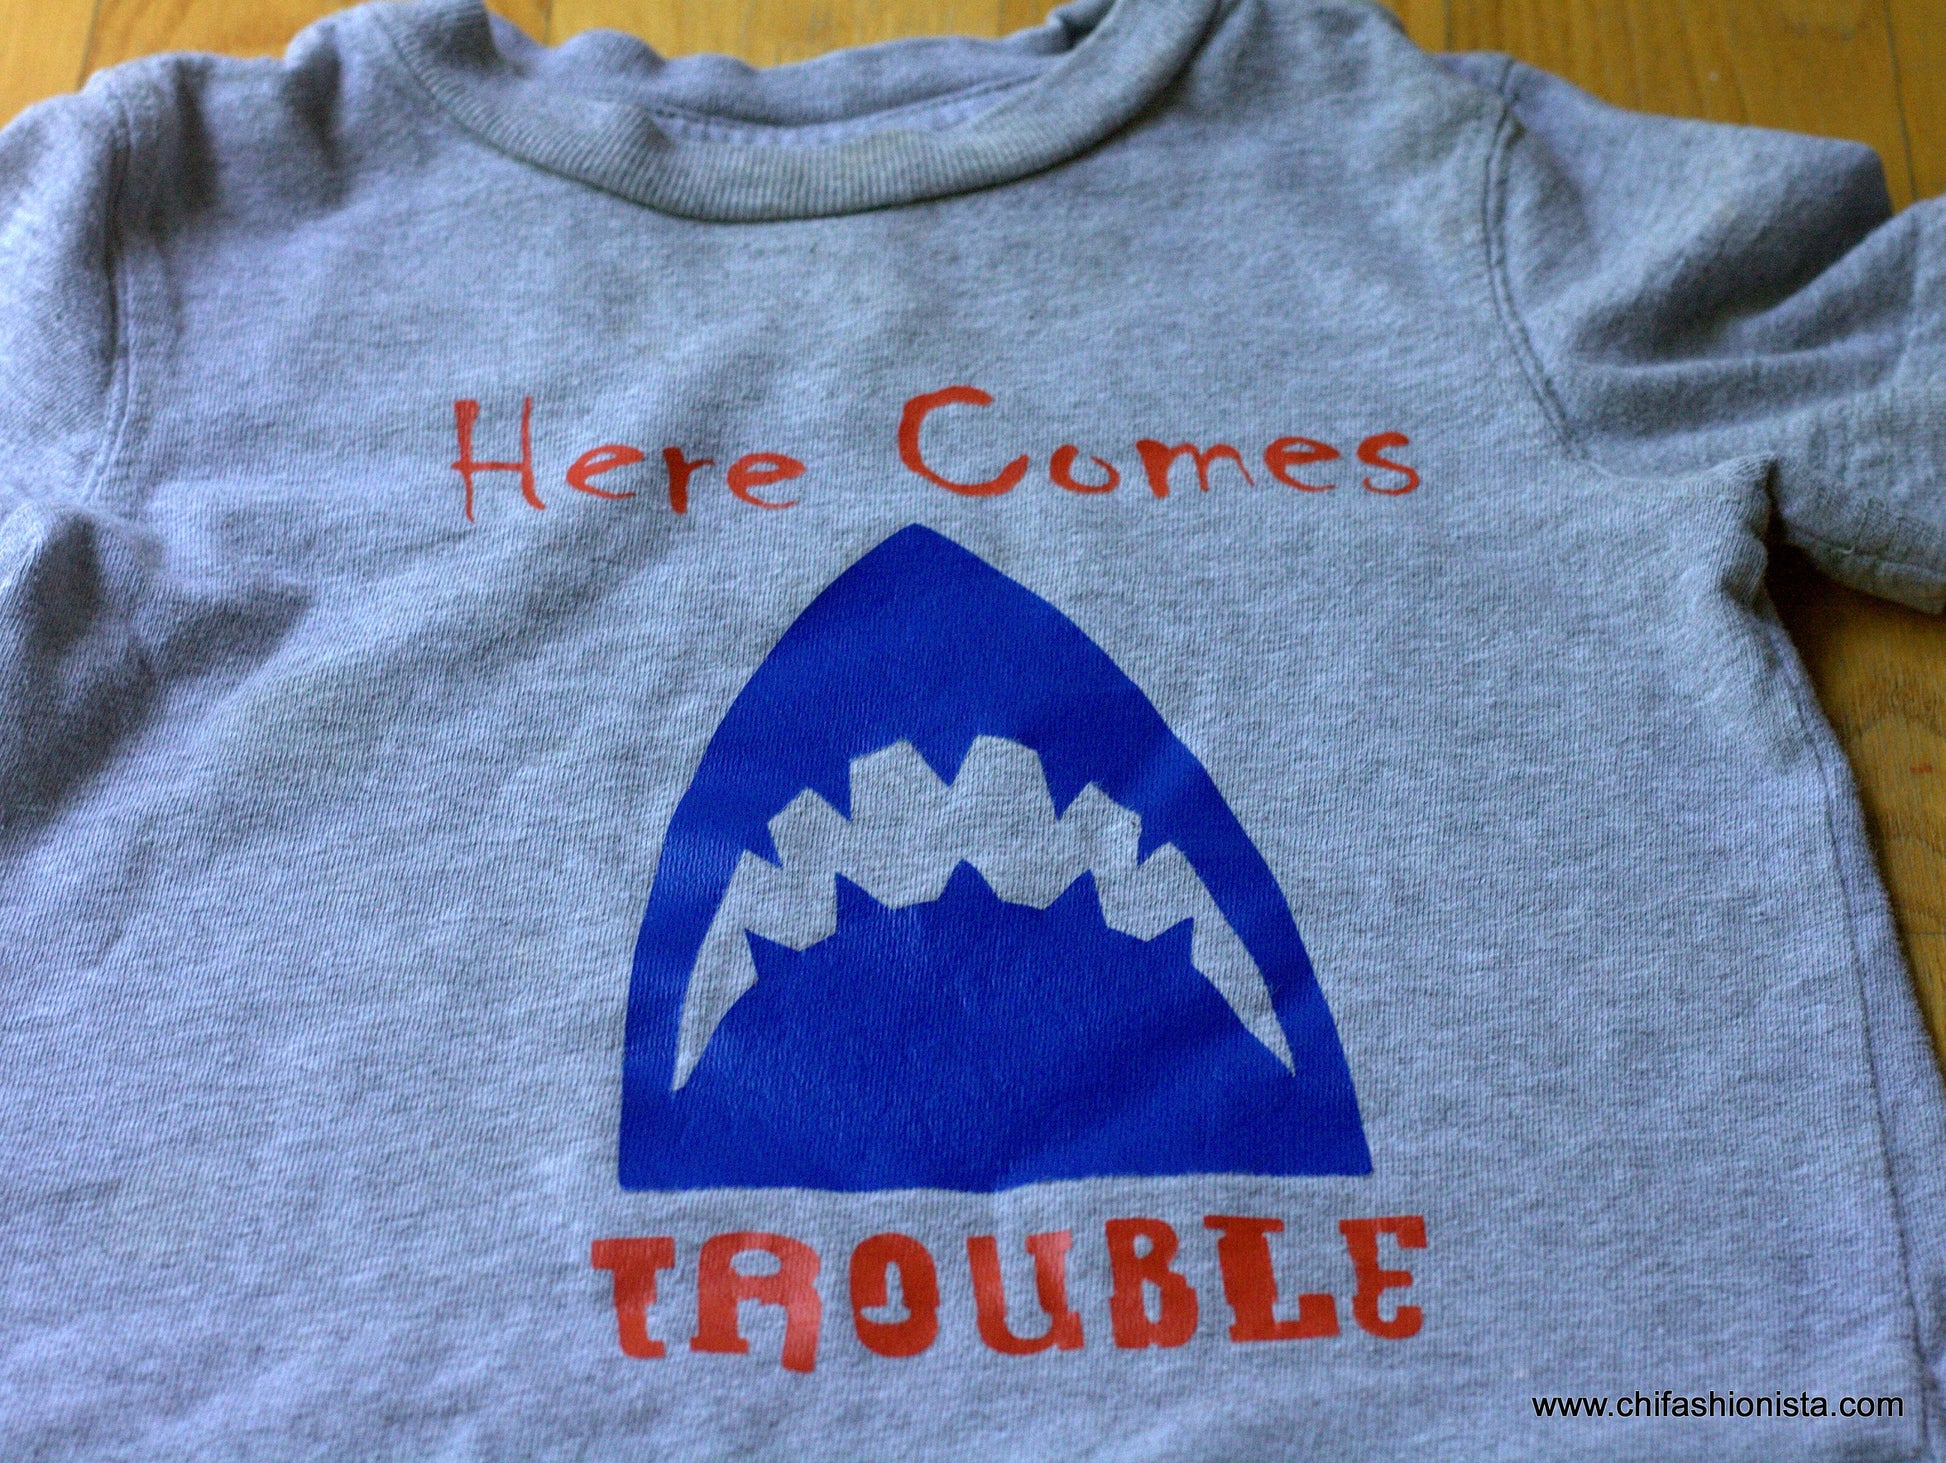 Handcrafted Children's Clothing, Clothing for Children and Parents, Shark Week Inspired- Toddler Shirt, chi-fashionista